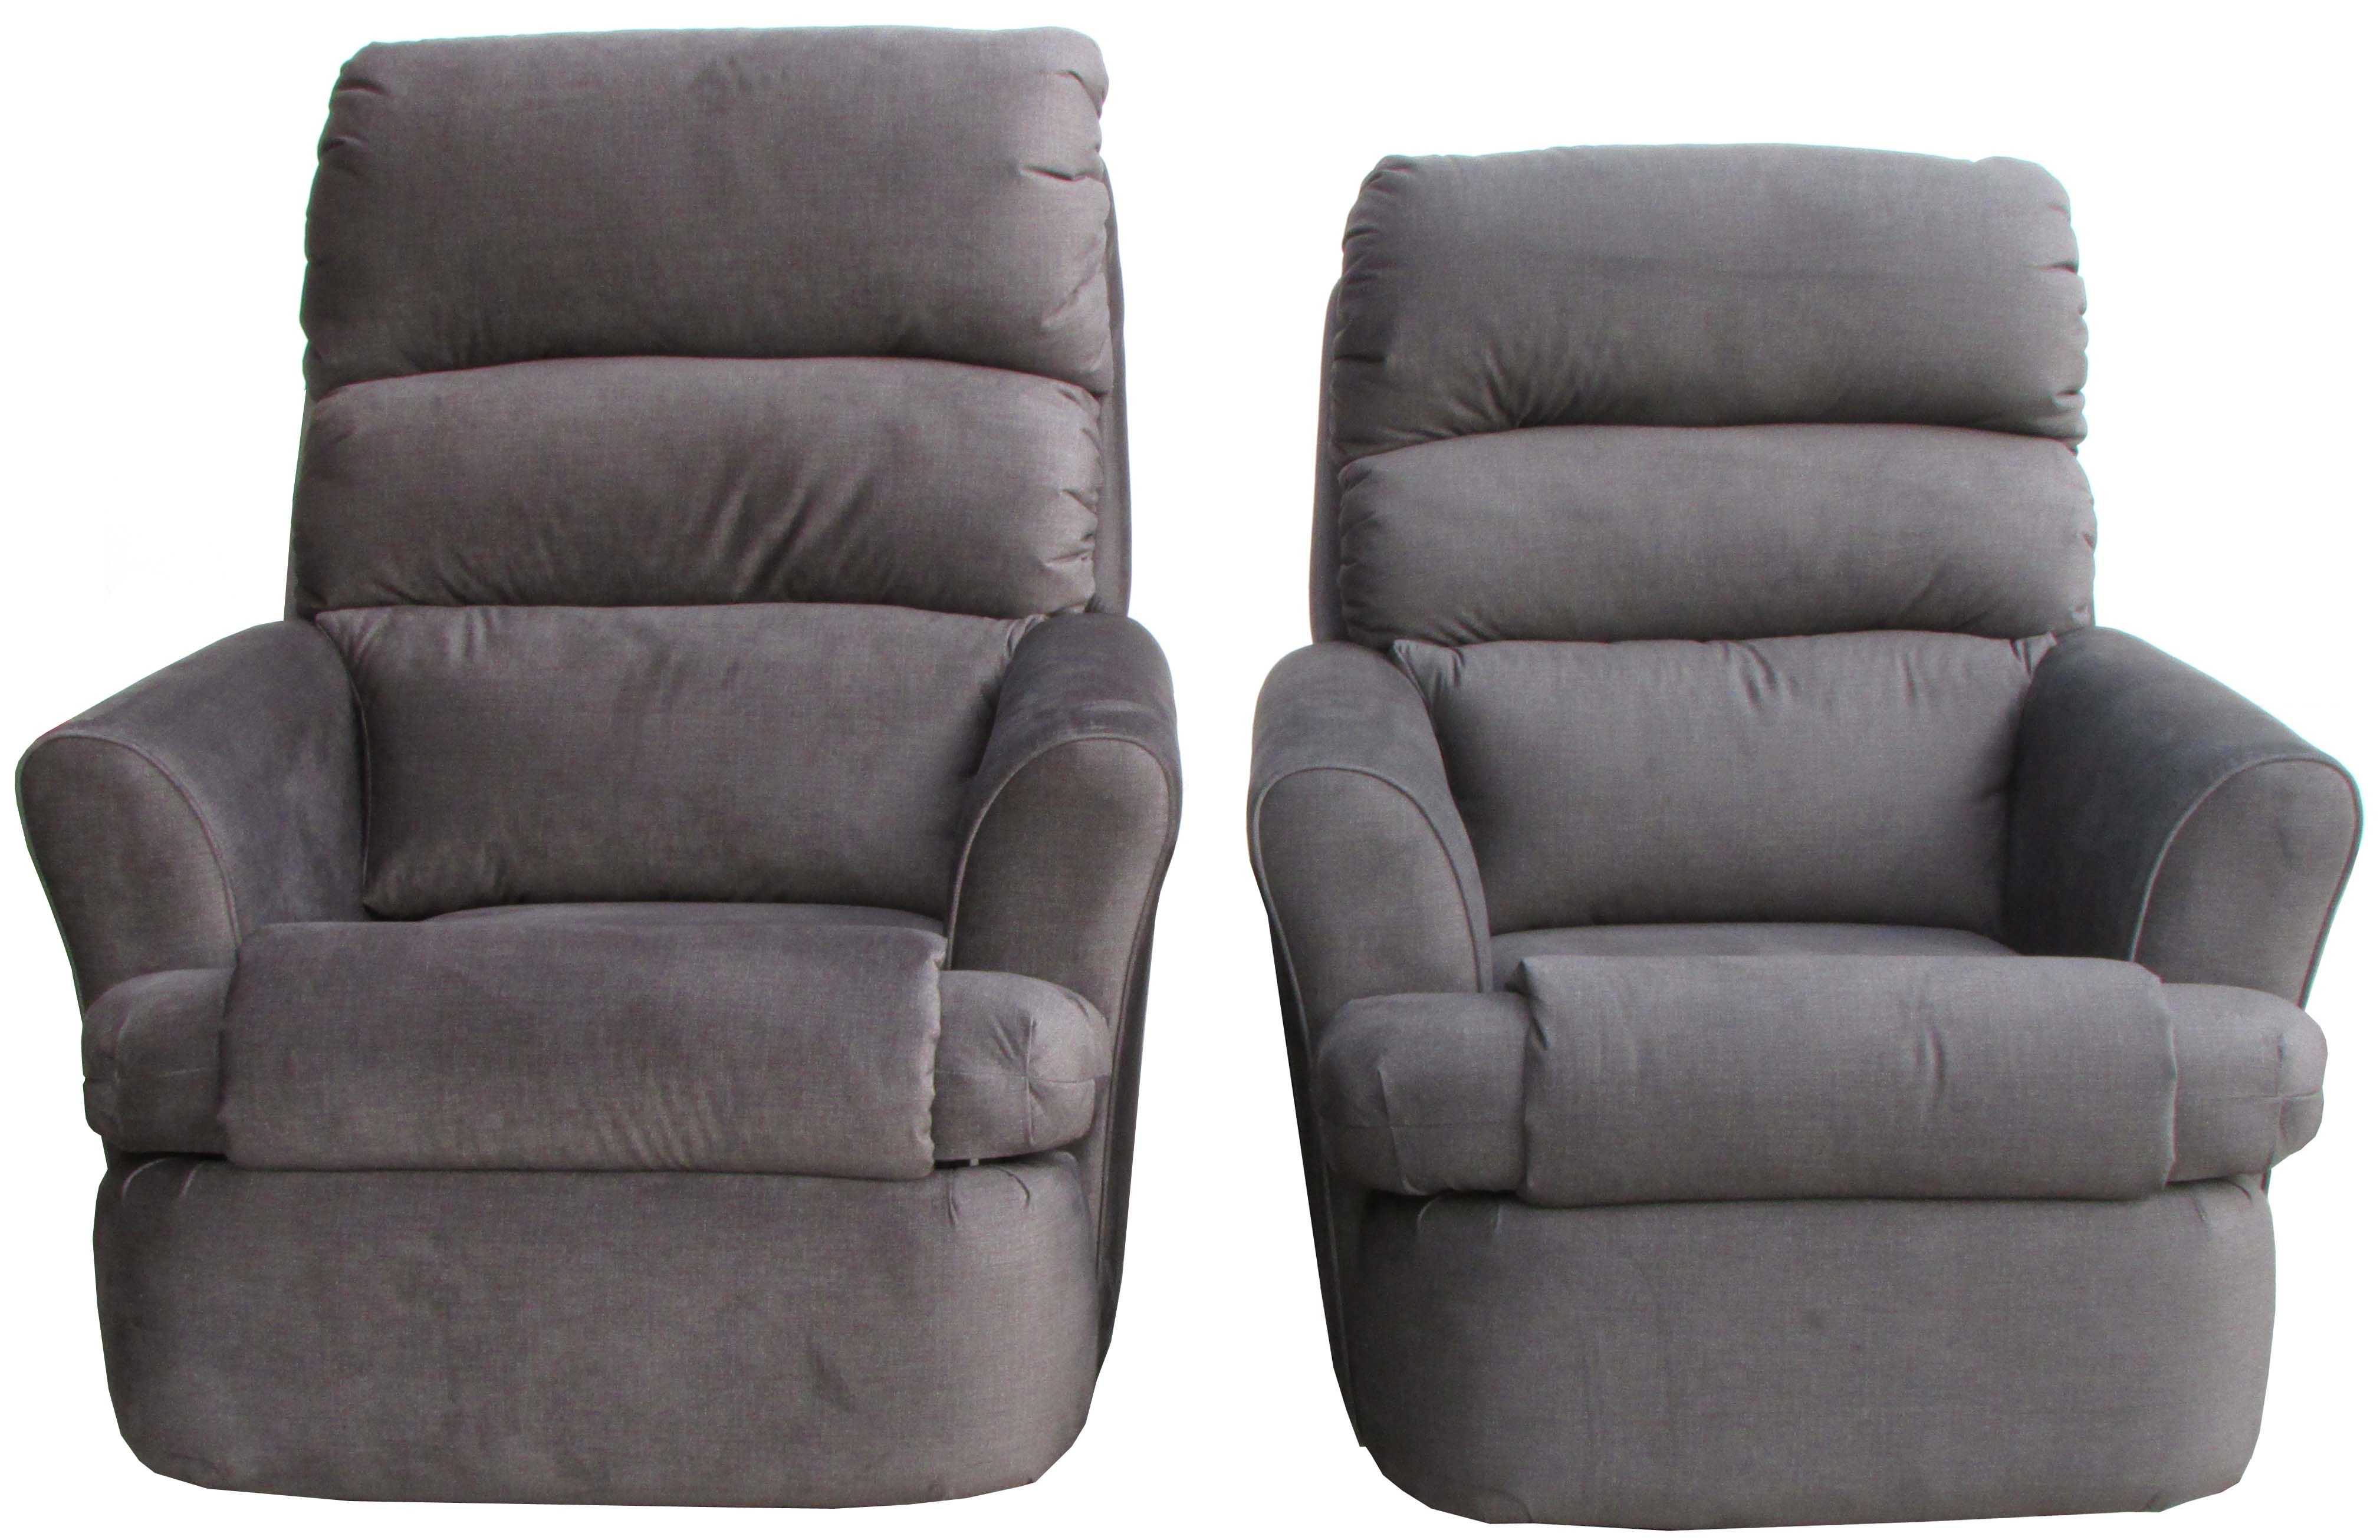 Chairs & Recliners Throughout Franco Iii Fabric Swivel Rocker Recliners (View 10 of 25)